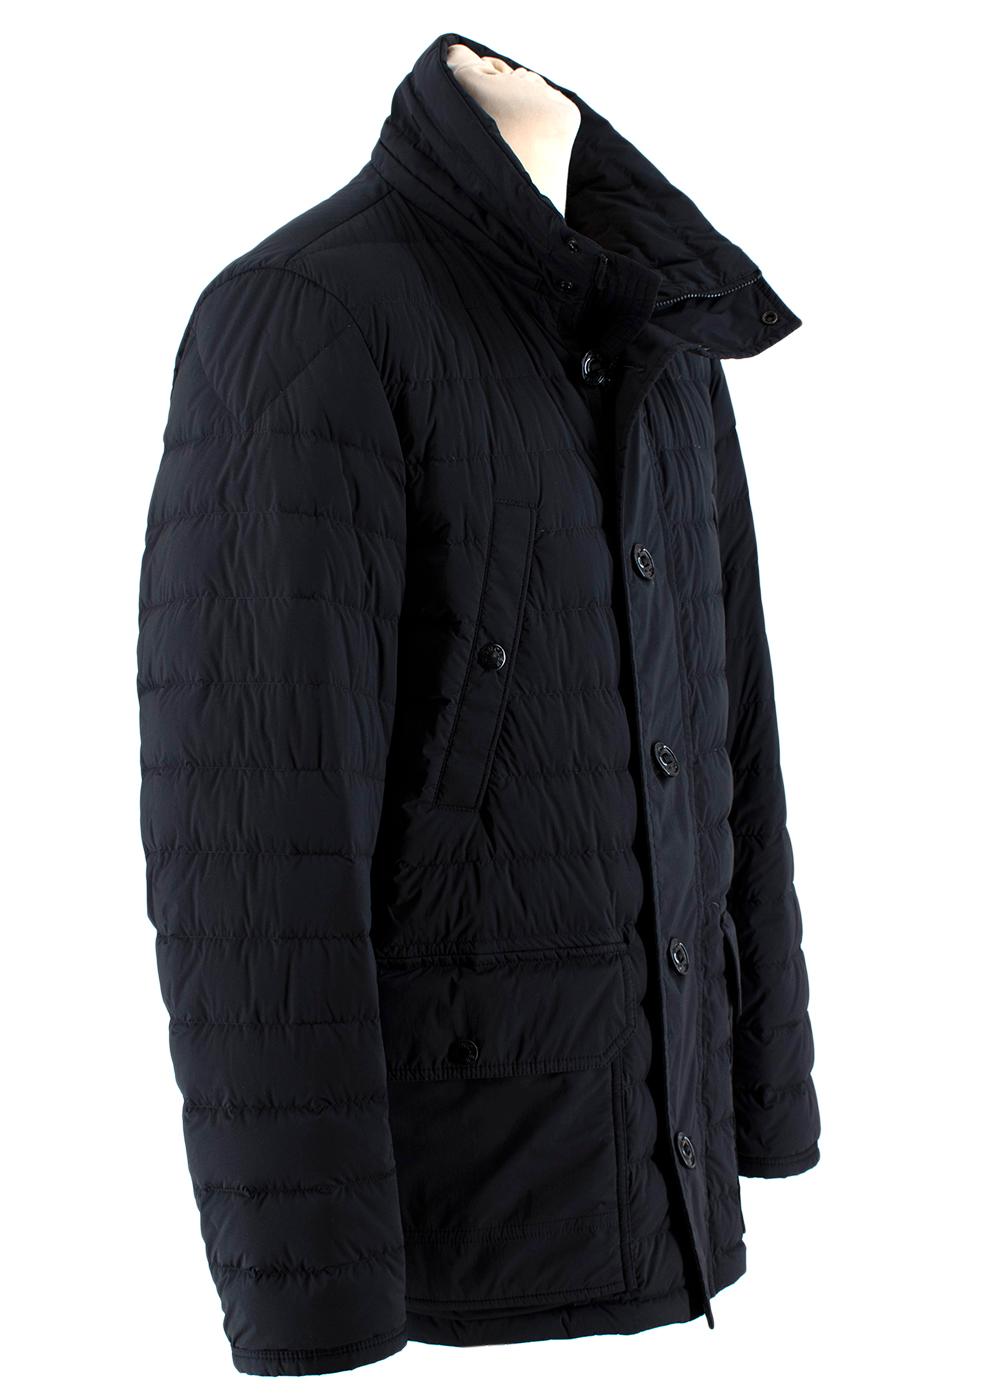 Moncler Black Dartmoor Quilted Down Coat
-Flap pockets with snap fastening
-Chest welt pockets with snap closures
-Front opening with zipper and branded buttons
-Leather black Moncler logo on left sleeve

Materials: 85% nylon
15% spandex
Lining: 90%